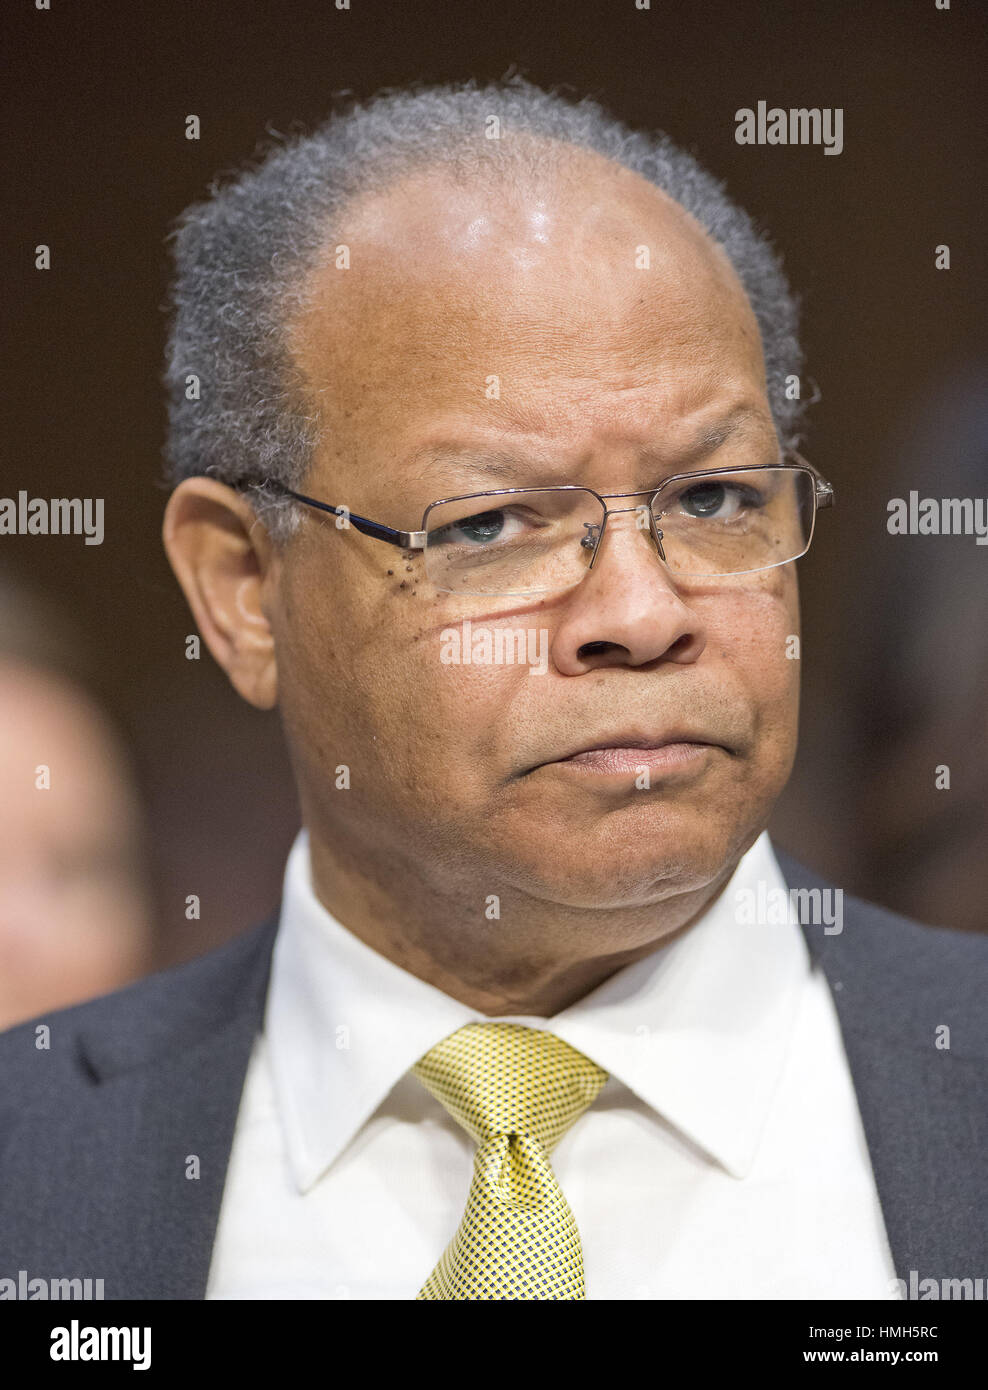 Washington, District of Columbia, USA. 29th Jan, 2015. The Reverend Doctor Clarence Newsome, President of the National Underground Railroad Freedom Center in Cincinnati, Ohio testifies during the United States Senate Committee on the Judiciary hearing on the confirmation of Loretta Lynch, United States Attorney For The Eastern District Of New York, U.S. Department of Justice, Brooklyn, NY as U.S. Attorney General on Capitol Hill in Washington, DC on Thursday, January 29, 2015. Photo Credit: Ron Sachs/CNP/AdMedia Credit: Ron Sachs/AdMedia/ZUMA Wire/Alamy Live News Stock Photo